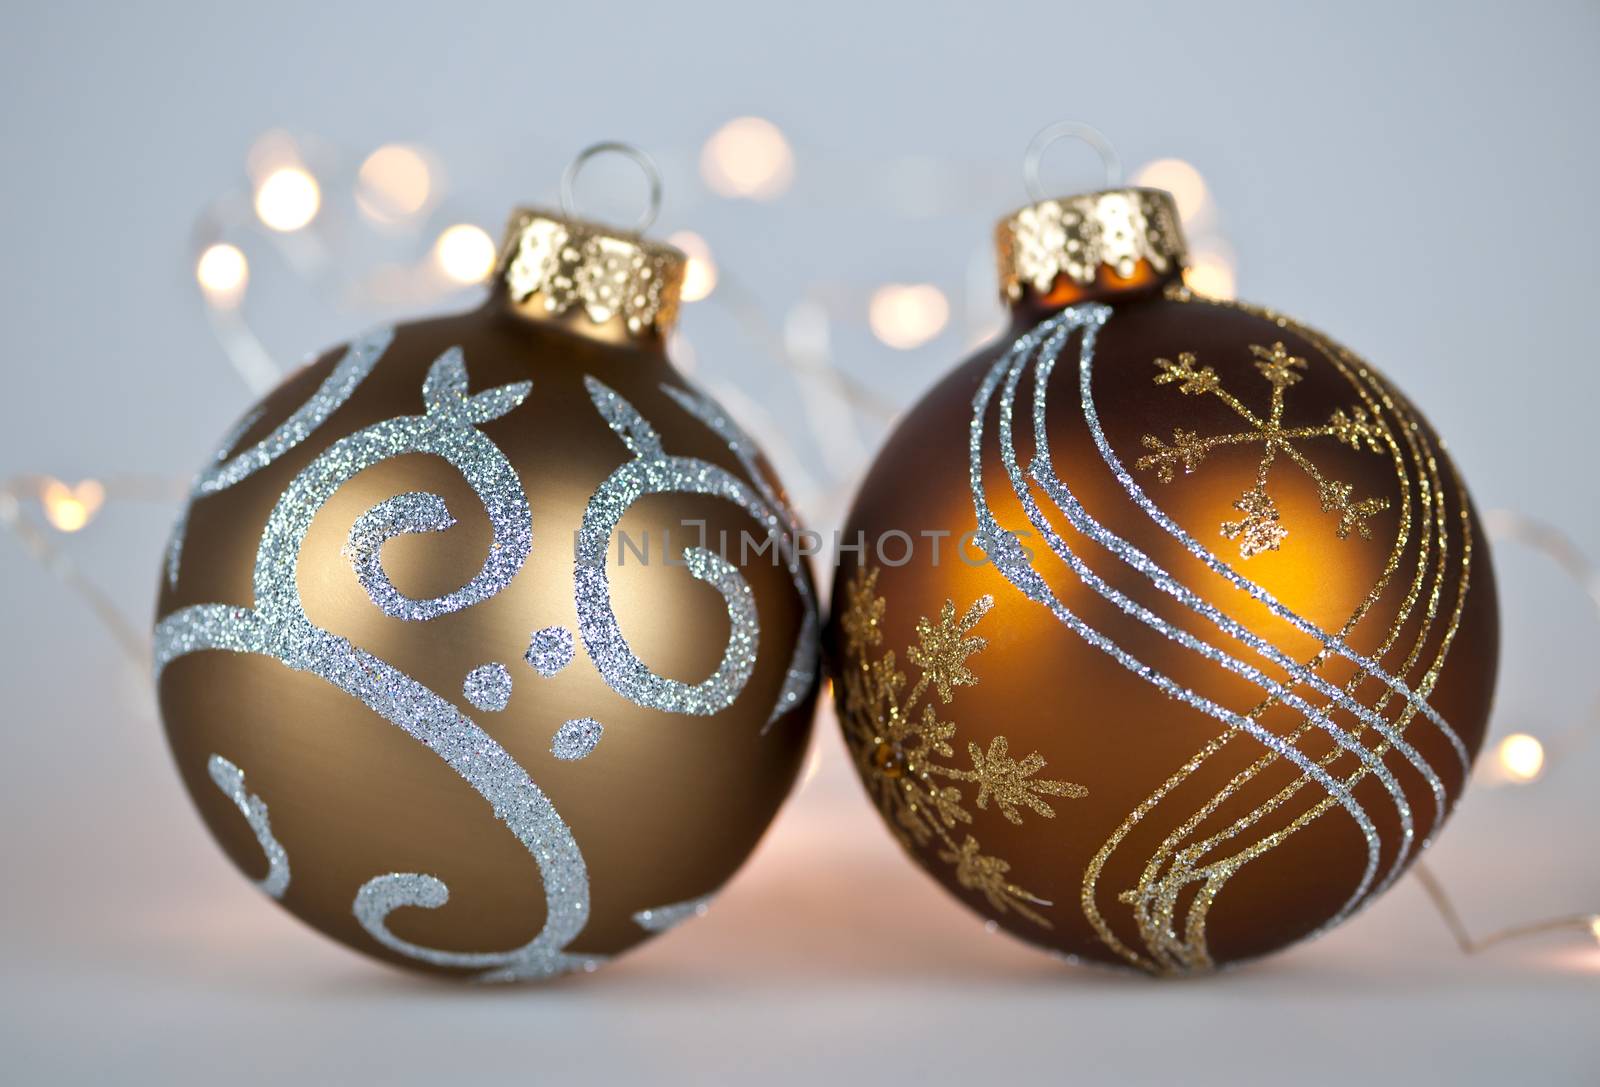 Golden Christmas ornaments by elenathewise